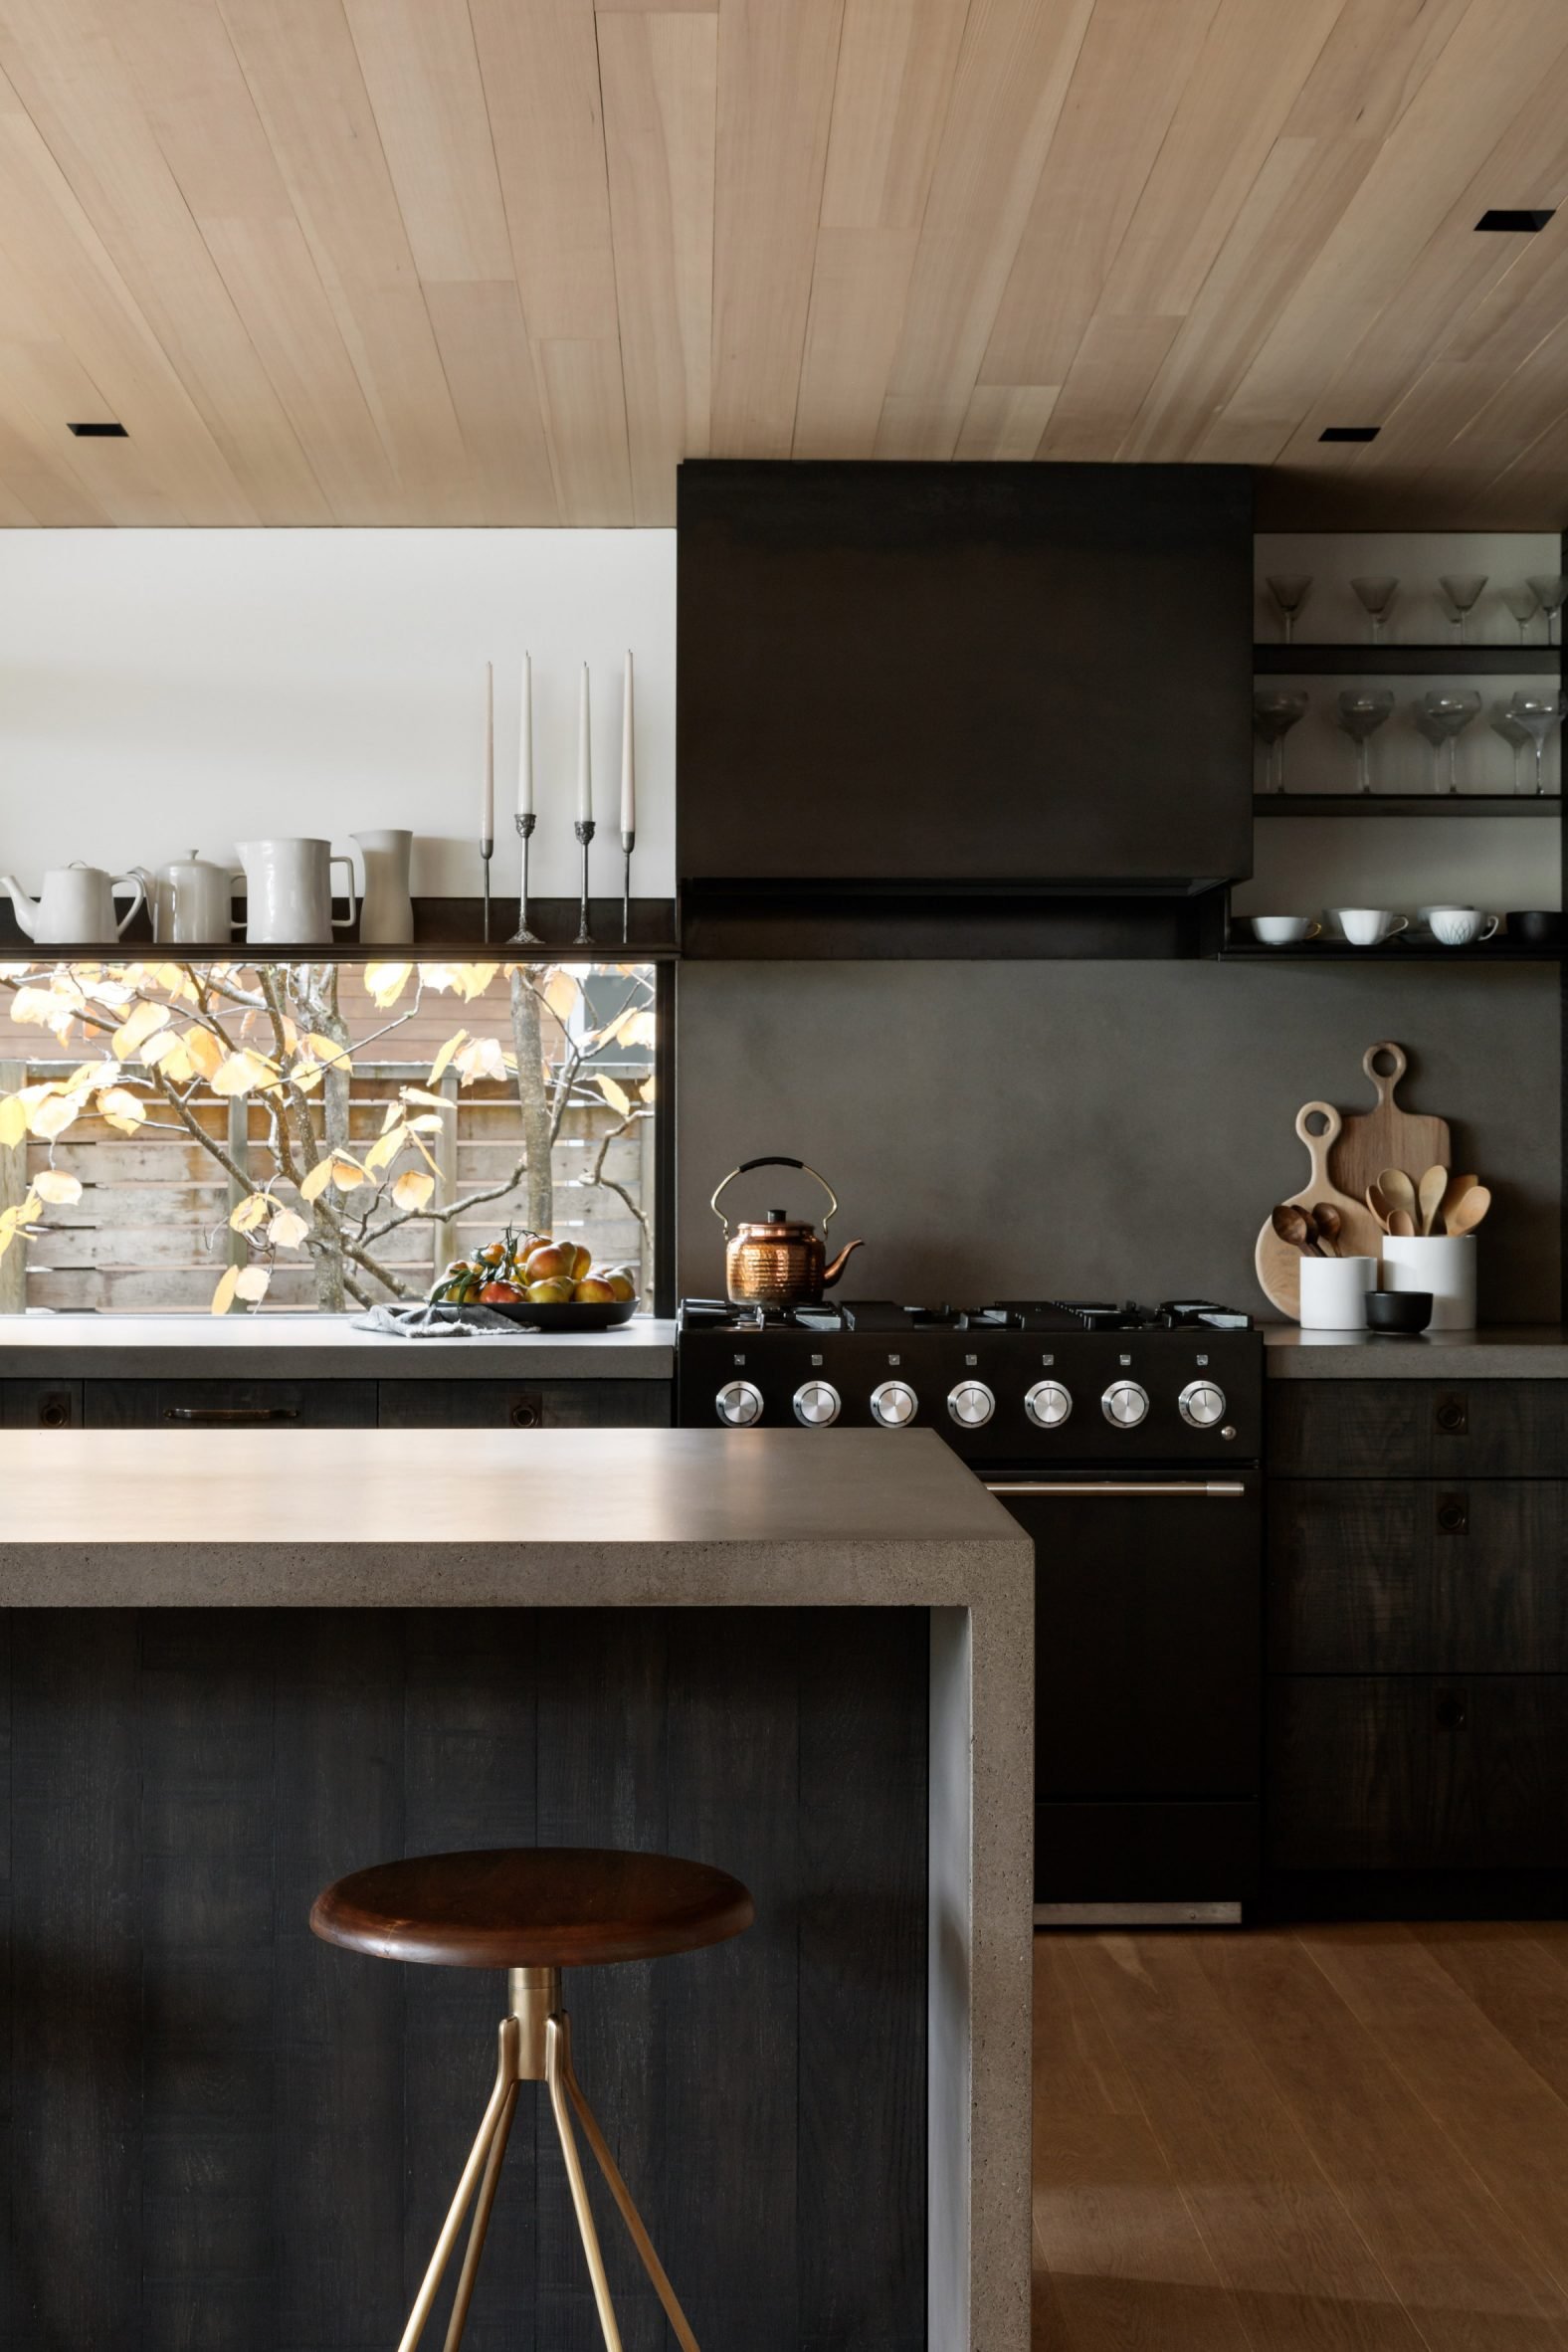 Dark-coloured kitchen with steel range hood and shelving